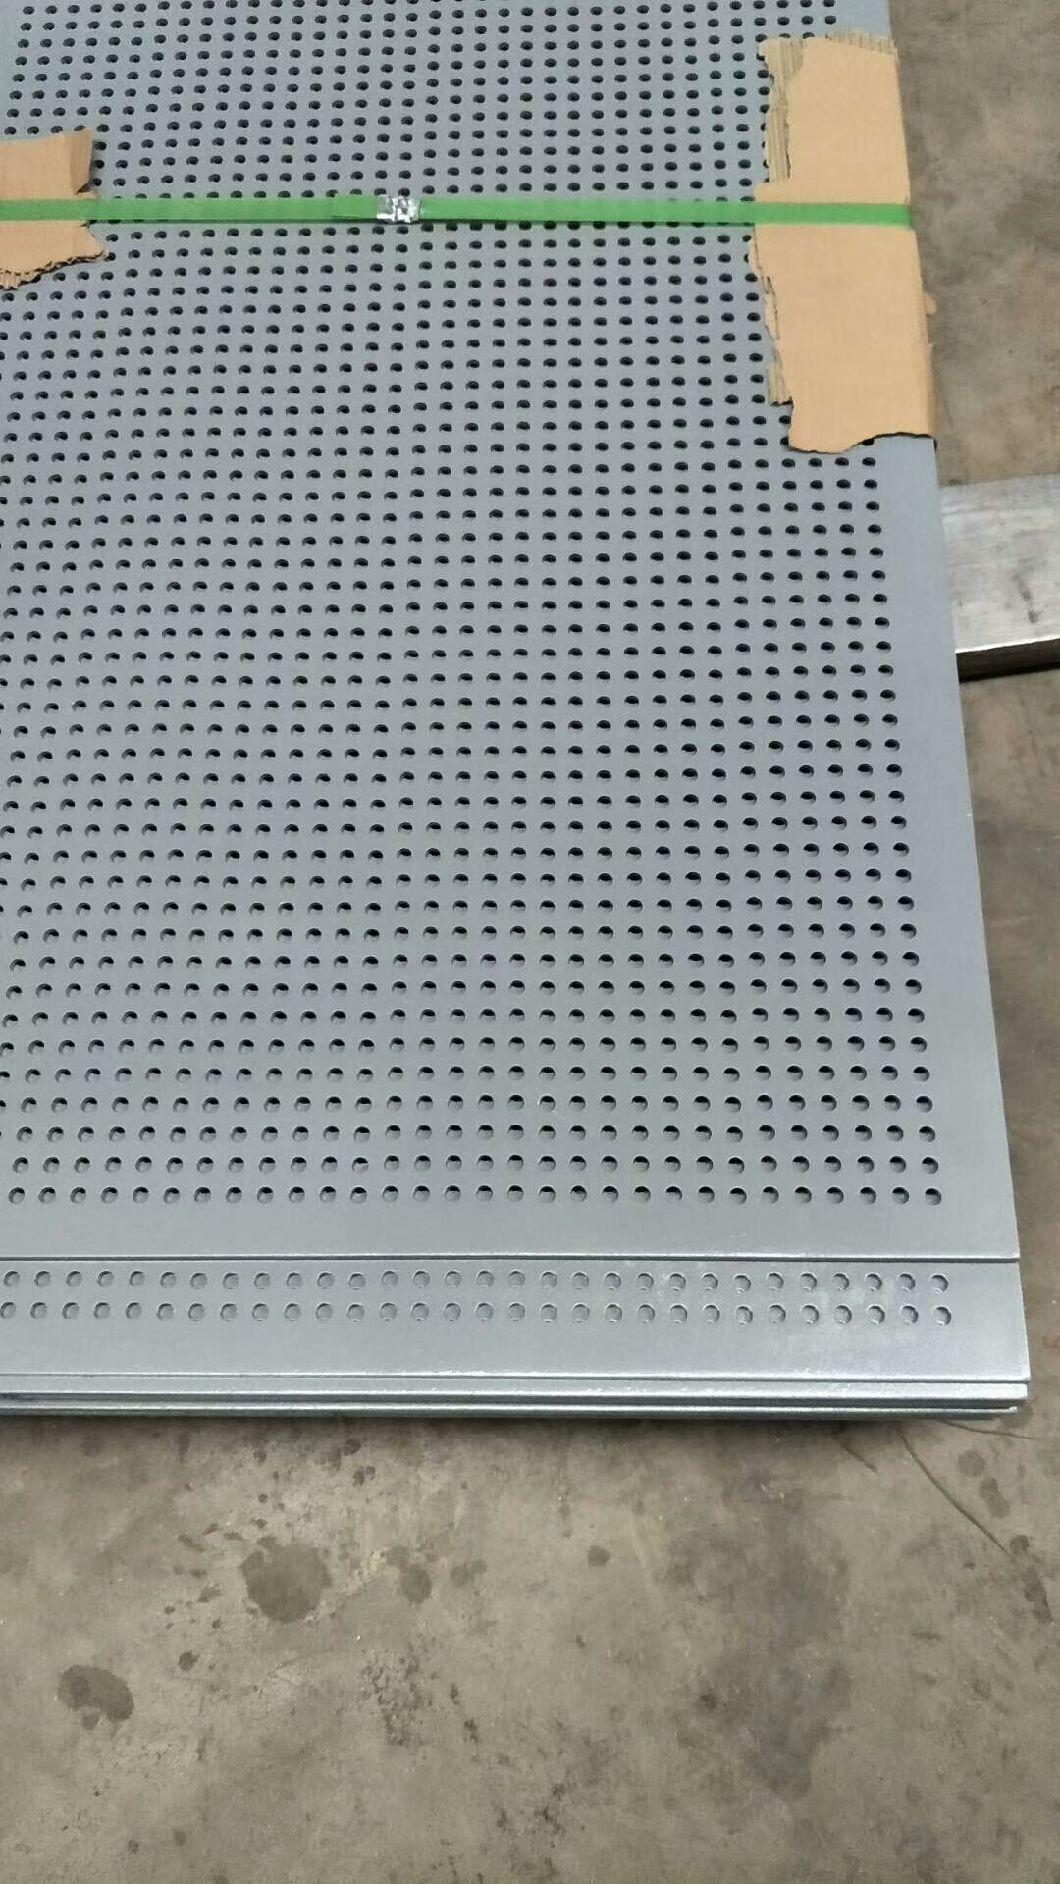 Stainless Steel Perforated Metal Sheet for (ceiling/filtration/sieve/decoration/sound insulation)